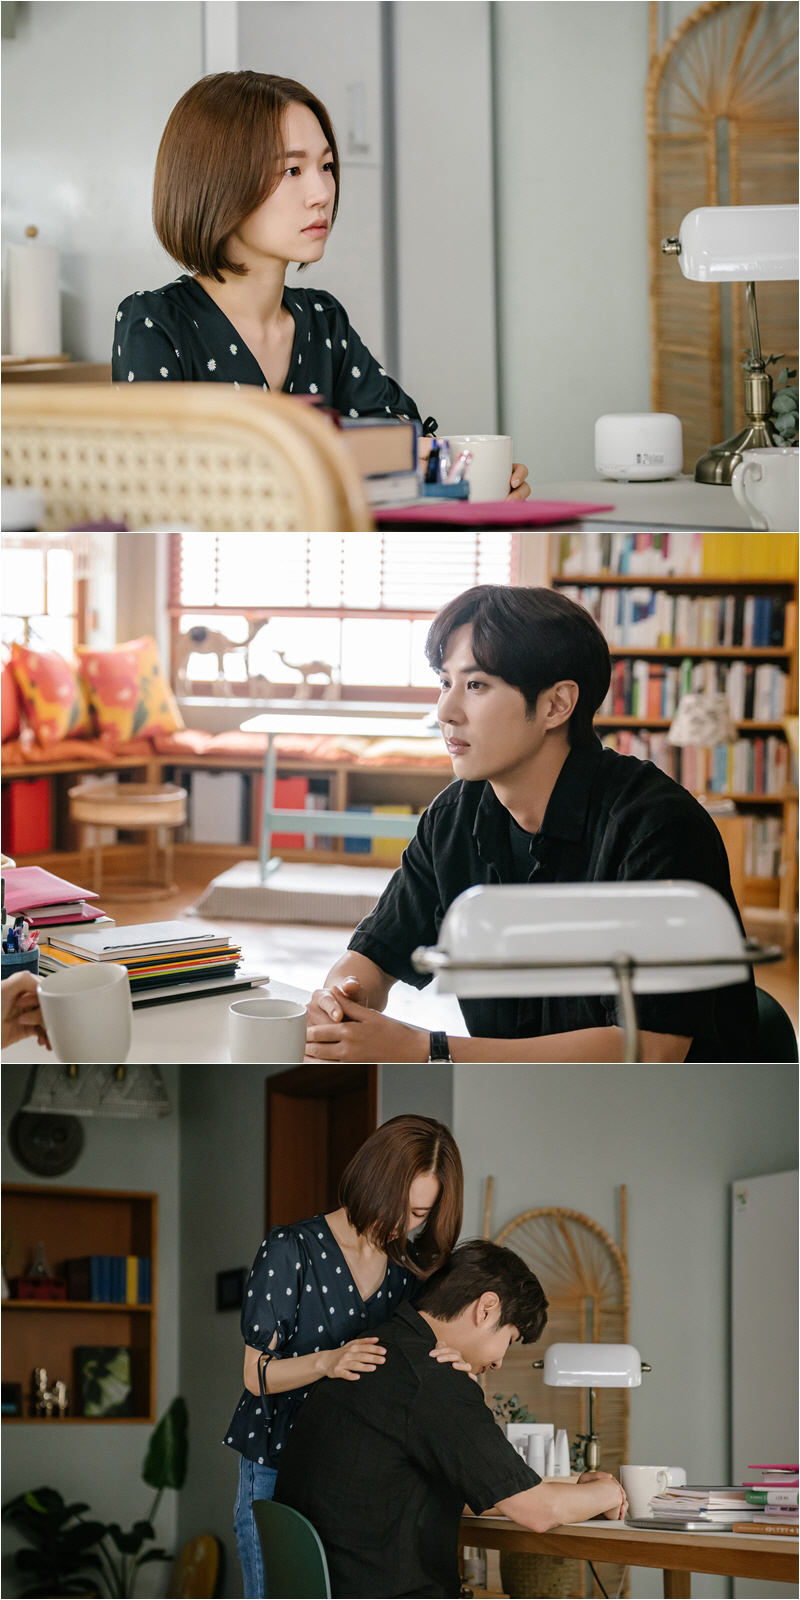 A decisive moment comes for 15-year-old Yeri Han, Kim Ji-seok, who chose friendship.TVN Mon-Tue drama I dont know much, but Family. (director Kwon Young-il, playwright Kim Eun-jung, production studio Dragon/below Family.)On the 13th, ahead of the 13th broadcast, the side captured the unusual atmosphere of Kim Eun-hee (Yeri Han) and Park Chan-hyuk (Kim Ji-seok).Kim Eun-hee, who warmly hugs Park Chan-hyuk, who tells something, stimulates curiosity by raising Feeling that he has never seen before.It is noteworthy what kind of change is waiting for the two people who wanted to remain friends because they could not cross one line.Family. has left only four times to the end of the movie, and the five families who have built up a wall of misunderstandings with secrets that they could not tell, have changed while facing each others pain and sincerity.The appearance of the family who started to hurt their wounds in their own way gave a deep afterglow beyond empathy.Kim Eun-hee and Park Chan-hyuk confirmed the Feeling more than friendship toward each other, but again drew the line Friend.Kim Eun-joo (Chu Ja-hyun) accepts her husband Yoon Tae-hyung (Kim Tae-hoon)s identity and her birth secret and is preparing for a new beginning.Kim Sang-sik (Jung Jin-young) and Lee (One Unknown) have also changed. They wanted to build new memories rather than one-year-olds.I enjoyed the little happiness that I had not enjoyed in the past and confirmed my mind by filling the gap of time away.The time that passed is irreversible, but the couple promised to spend the future time without regret has regained the time of youth.But as soon as happiness was in hand, I was shocked when Kim Sang-sik fell in front of Lee.Attention is drawn to the ending of what kind of story the change that I encountered in the port of commerce, which left only four times, will solve.In the meantime, Kim Eun-hee and Park Chan-hyuk, who face each other in a heavy atmosphere, are eye-catching.Park Chan-hyuk, who only listened to Kim Eun-hees story, is interesting to see Kim Eun-hee, who seems shocked by the unexpected story he first brought out.Kim Eun-hee, who has come to Park Chan-hyuk, who is trying hard, shows tears without being able to control Feeling.I can see the strange Feeling that I have never seen before from Kim Eun-hee, who warmly hugs Park Chan-hyuk.Will Kim Eun-hee and Park Chan-hyuk eventually remain friends? The last four years of insulation ironically felt each others preciousness.Kim Eun-hee, who catches and catches the shaking mind of Friend Park Chan-hyuk who wants to stay with him for the rest of his life. He felt his change when he approached him, but he chose friendship.Park also respected and understood Kim Eun-hees decision. The two men, who were not courageous even though they were aware of their hearts, were saddened.Kim Eun-hee always visited Park Chan-hyuk when he had a problem and gave him a helping hand.Kim Eun-hee, who did not wonder about his story while he regarded Park Chan-hyuk as a private safe that confides secrets.Expectations are high on what kind of change Park Chan-hyuks actions will bring to them first.Family. The production team said, Kim Eun-hee and Park Chan-hyuk come to the inflection point of Feeling.Park Chan-hyuks deep story will speed up the change in the relationship, he said. There are still the threads and secrets of Feeling that need to be solved.Please watch the rest of the five families until the end. Meanwhile, tvN Mon-Tue drama I dont know much, but Family. airs today (13th) at 9 p.m.